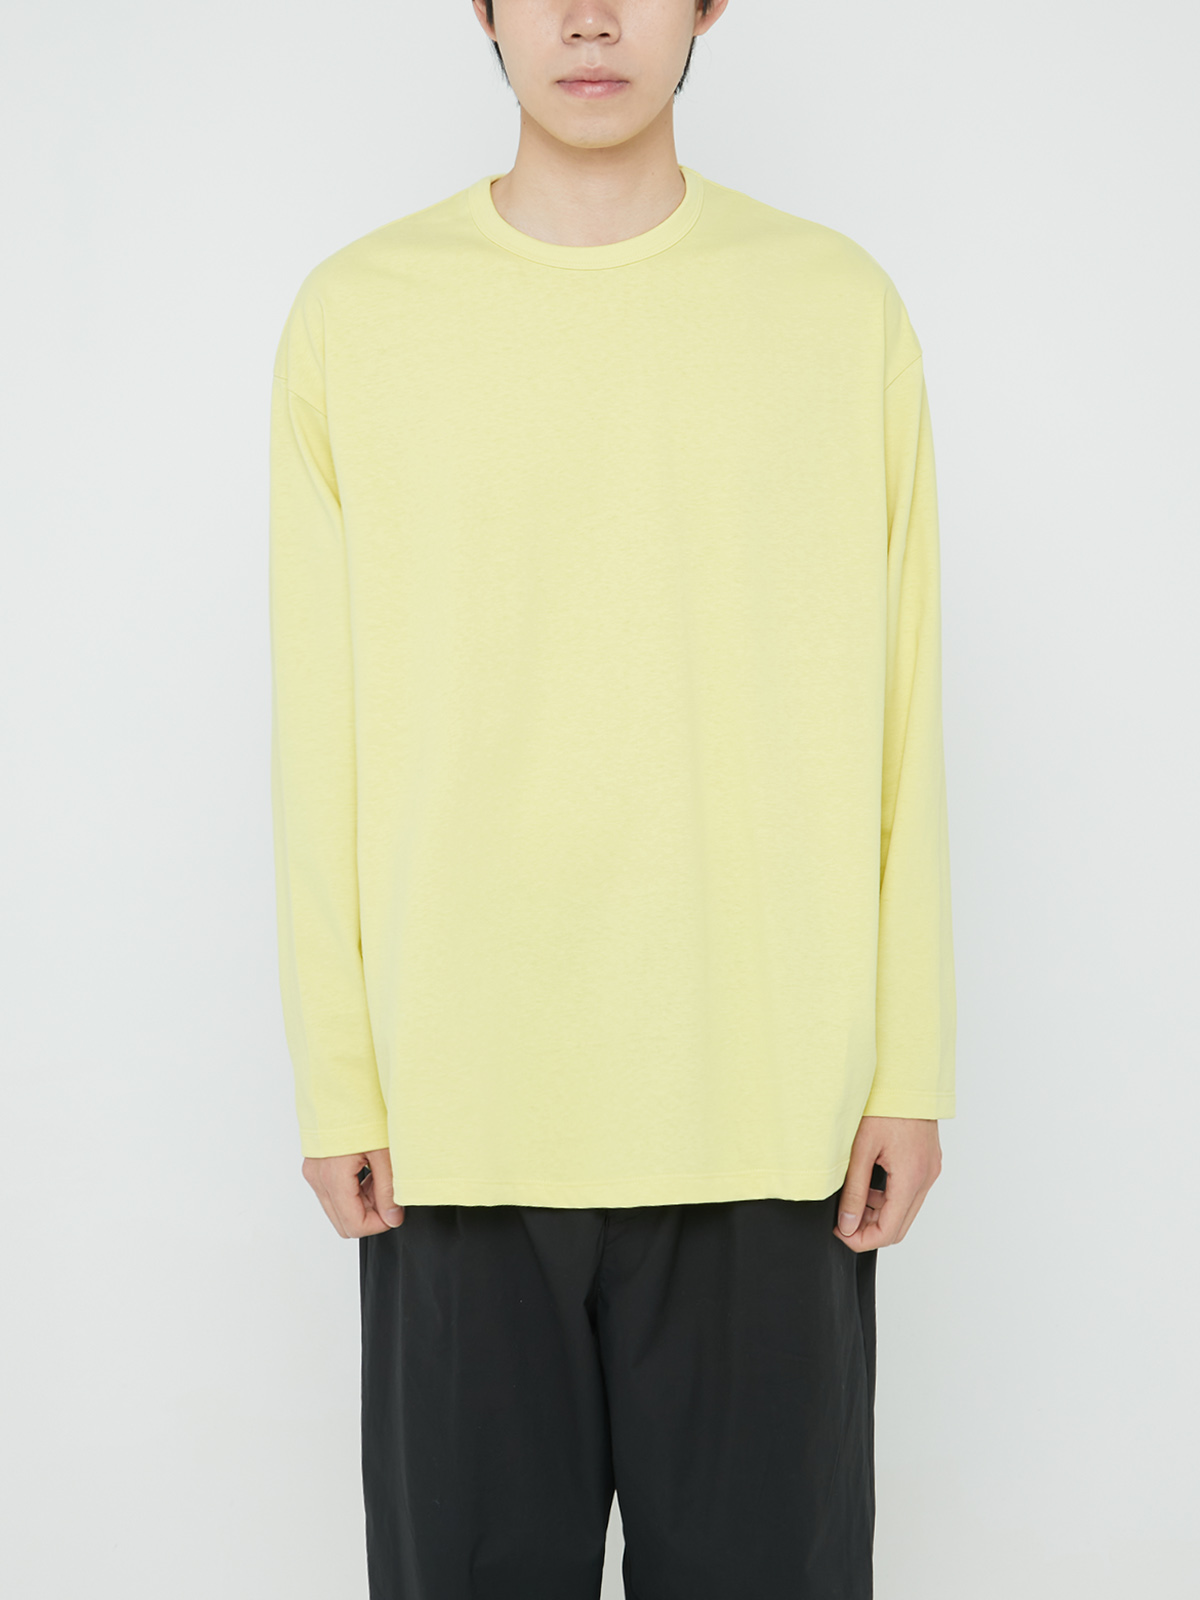 RECYCLED COTTON JERSEY L/S TEE (YELLOW)